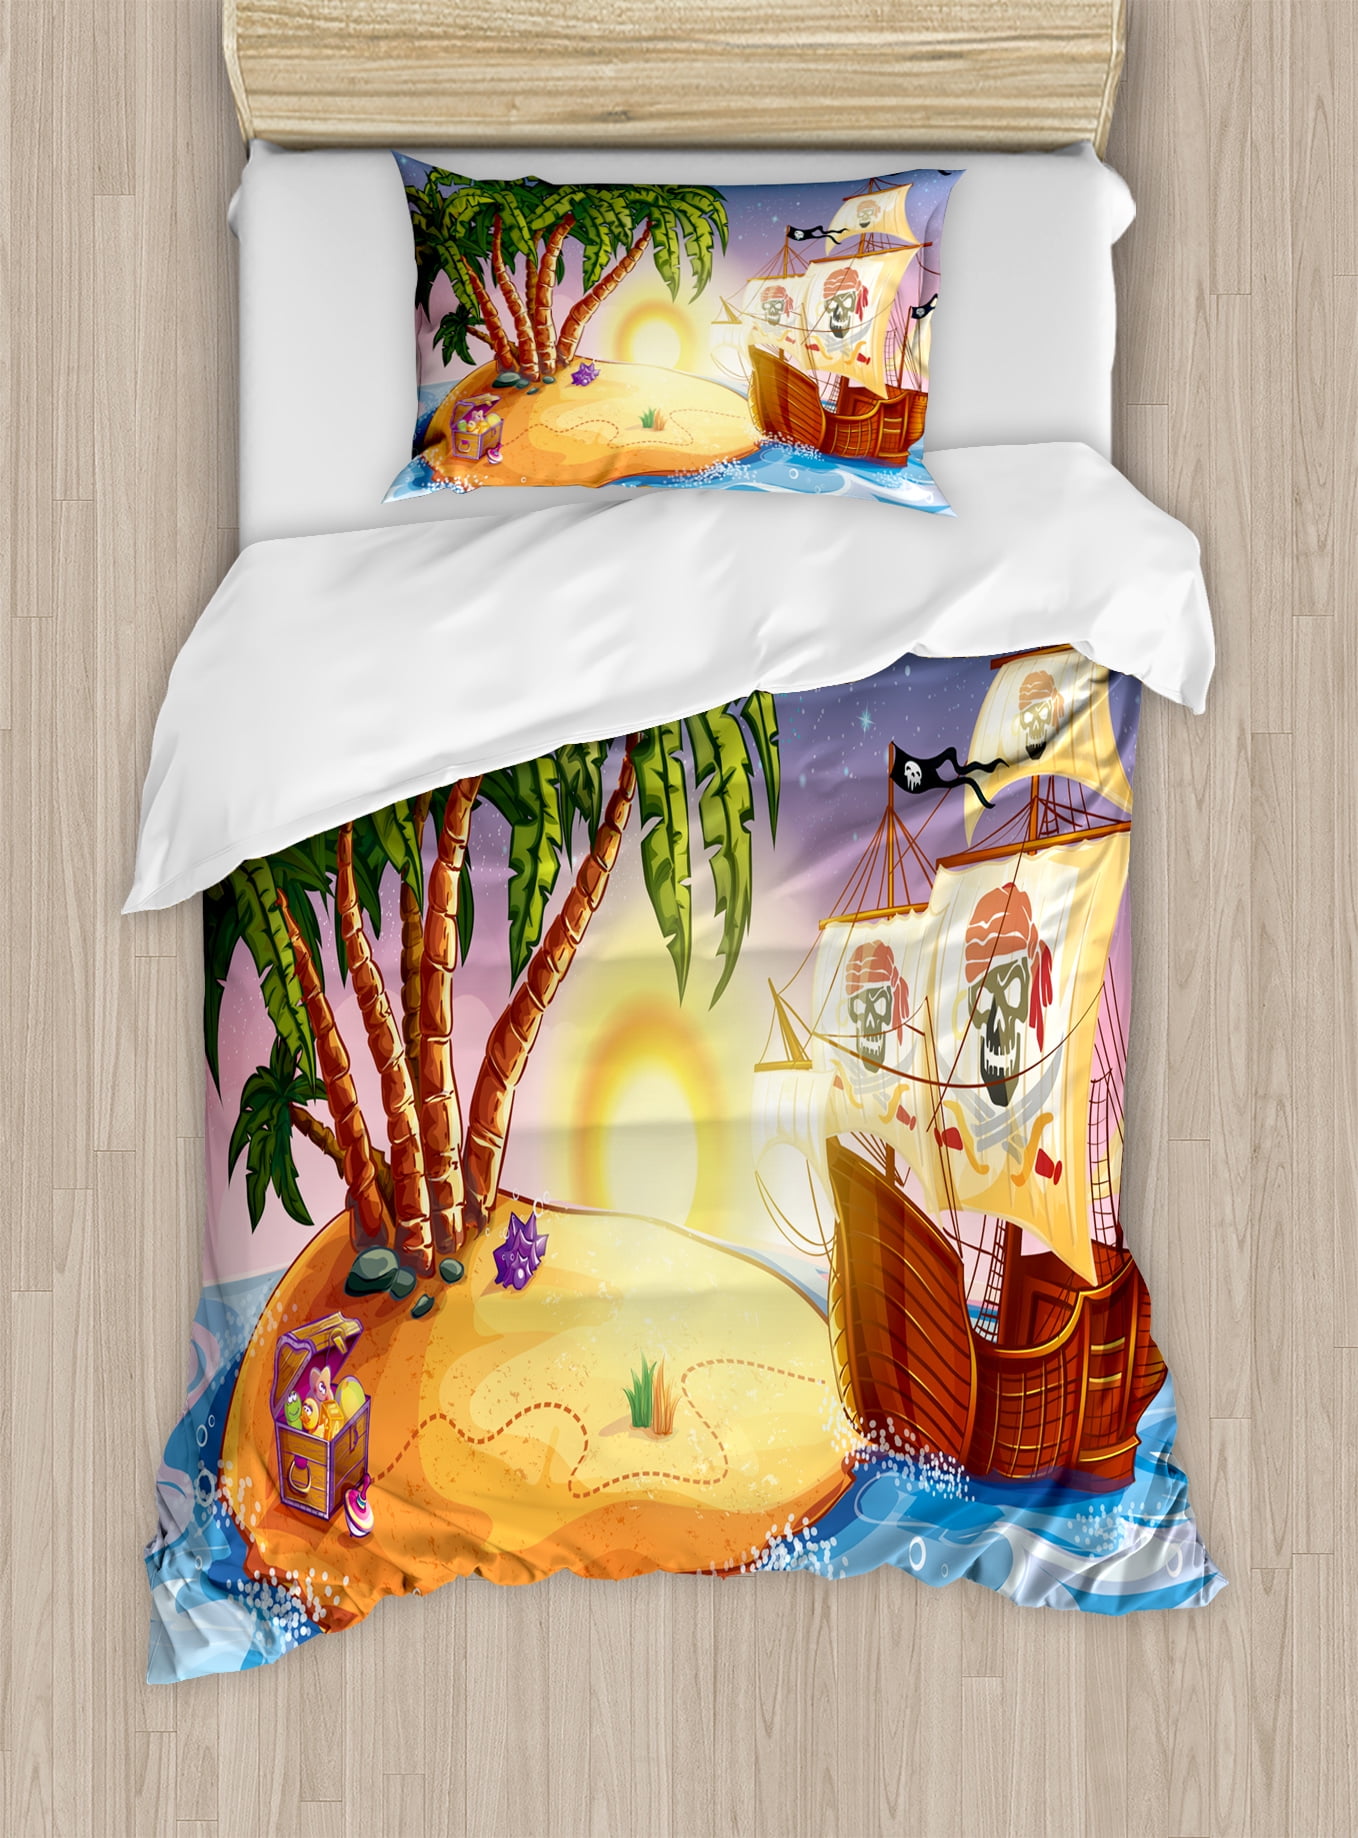 Pirate Ship Duvet Cover Set Ghost Ship On Exotic Sea Near